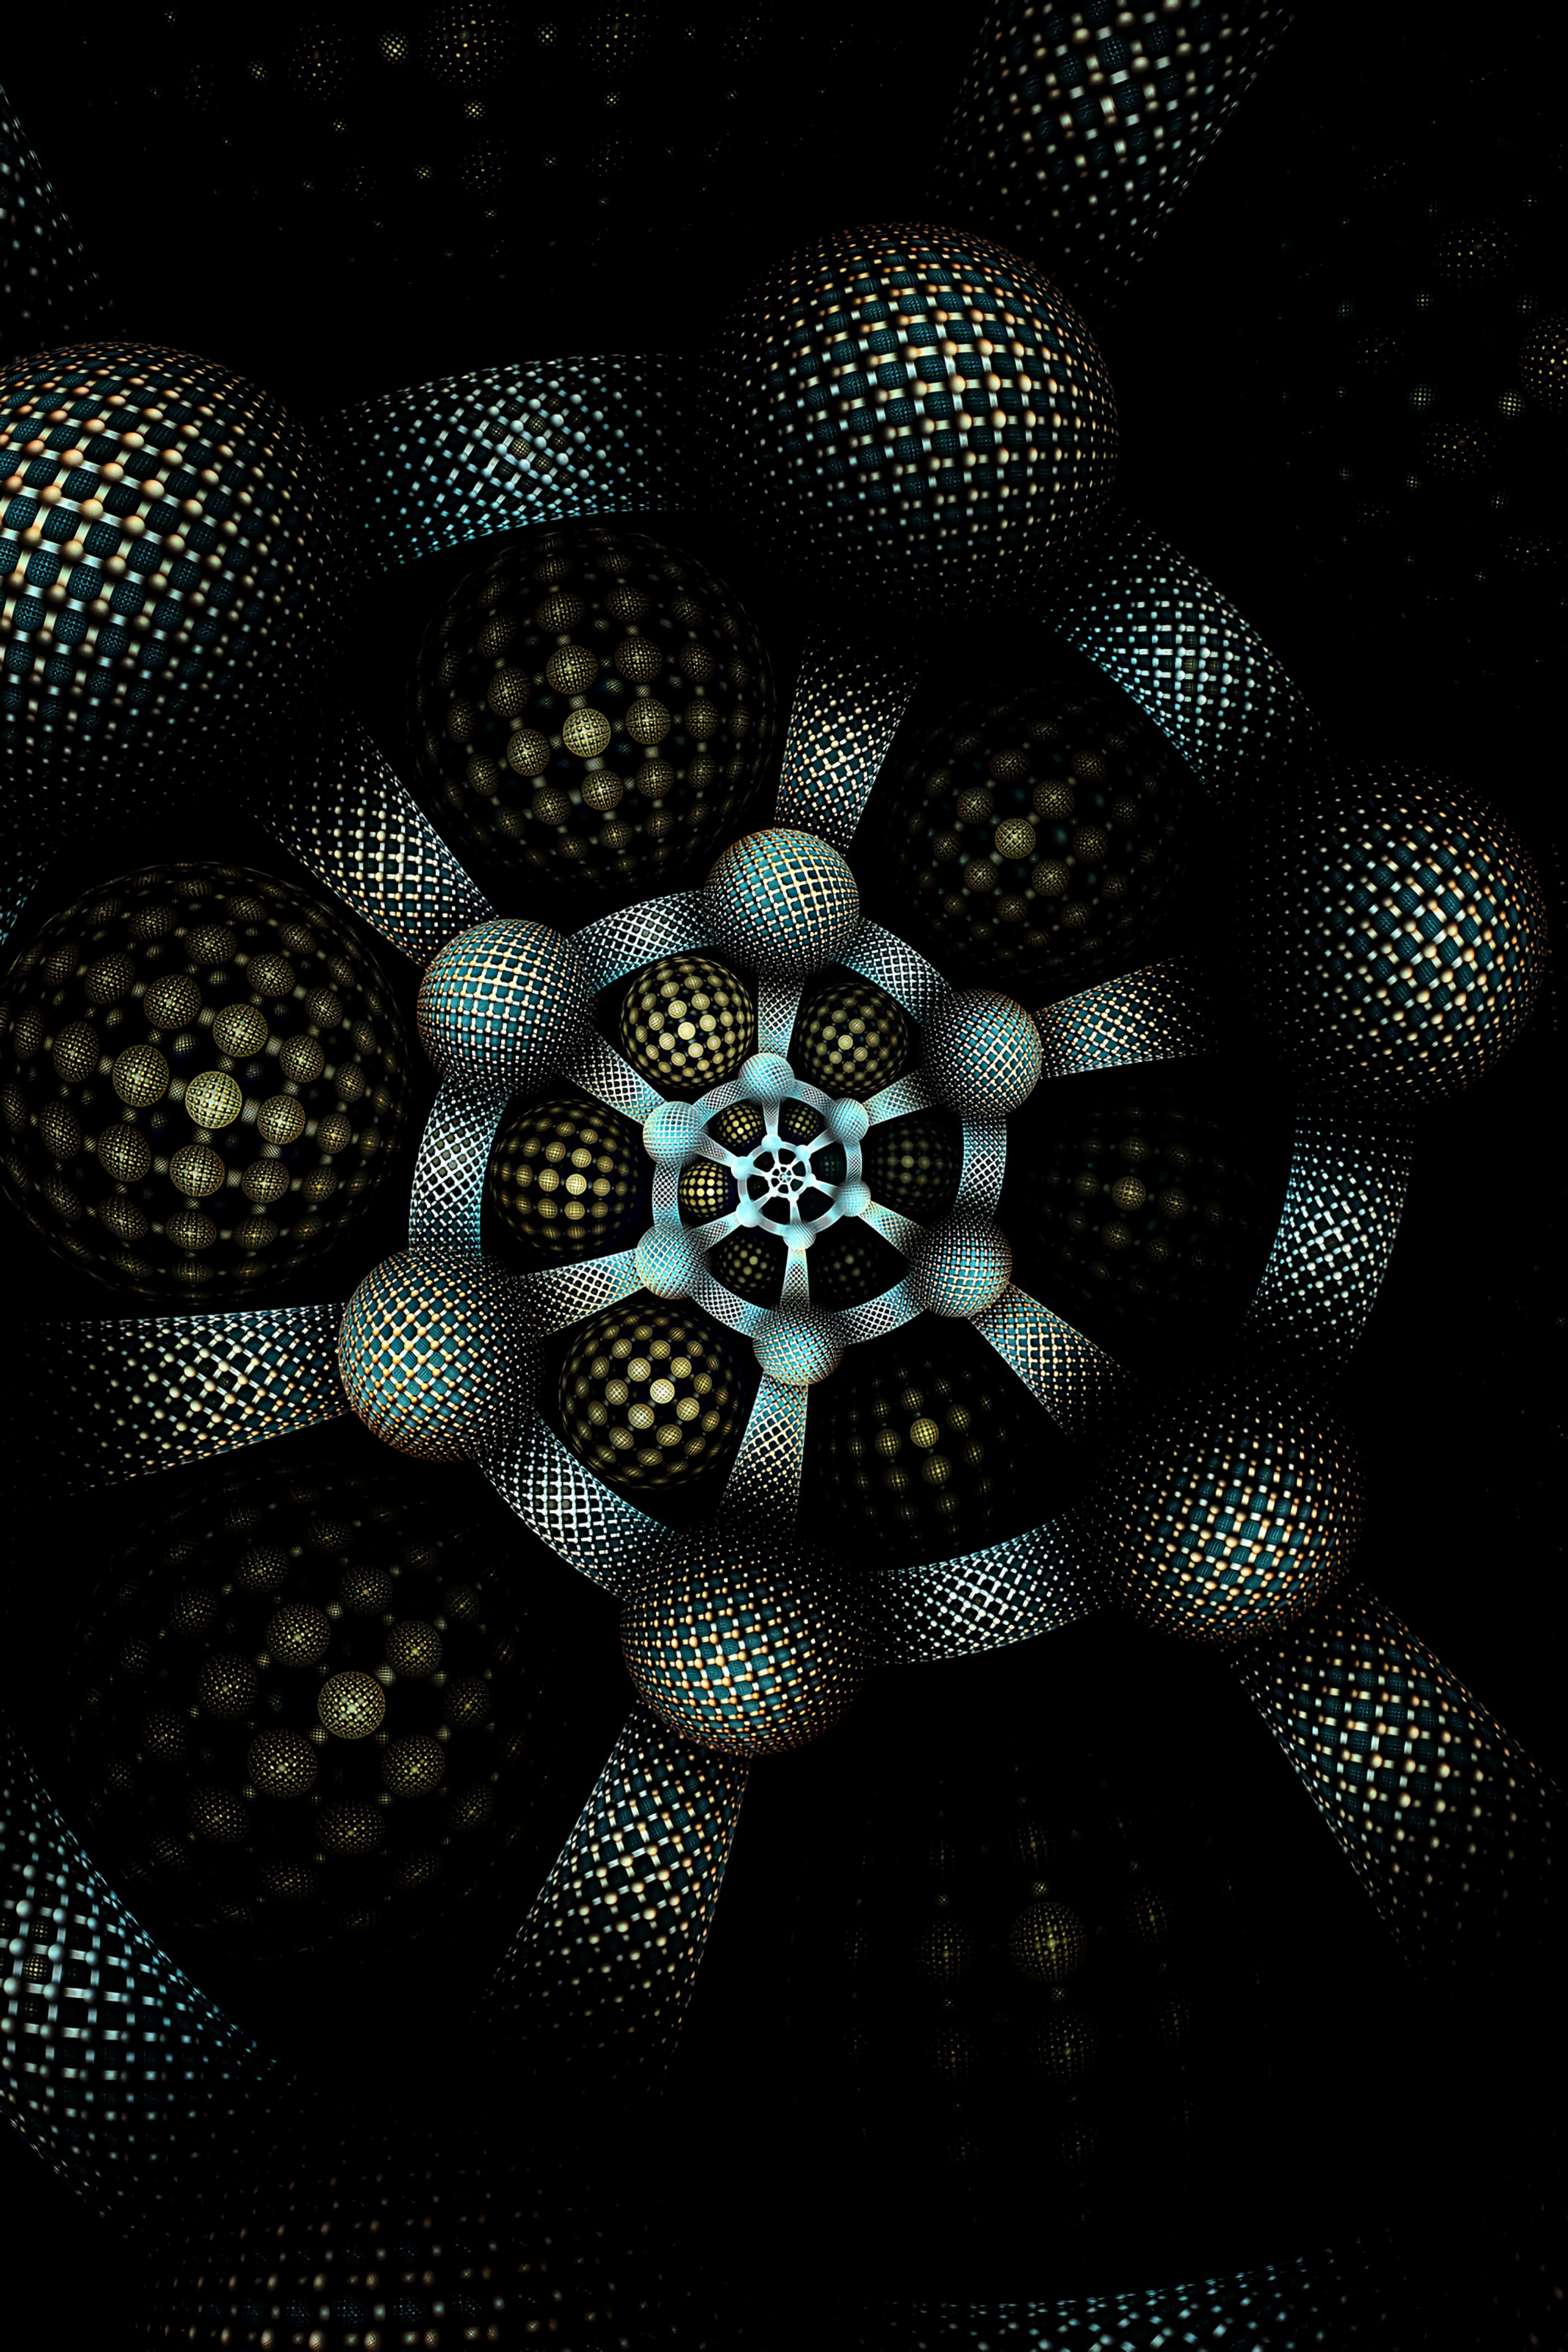 dark, form, circles, involute, abstract, pattern, fractal, swirling Full HD